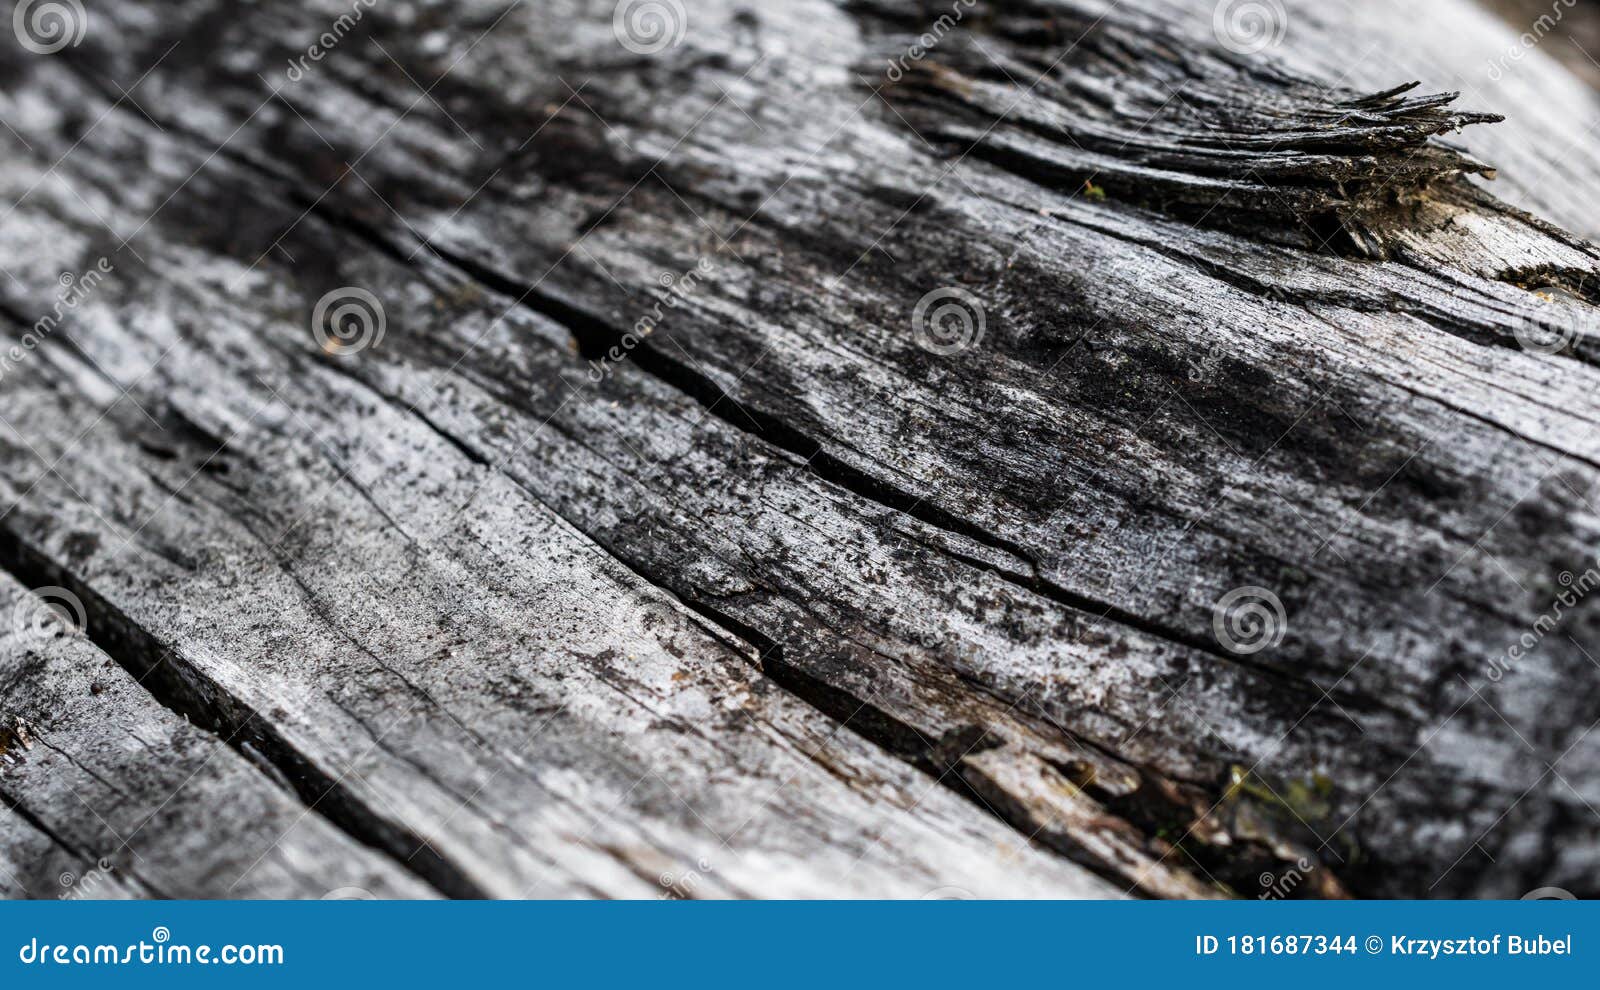 old cracked wood with visible details. textura